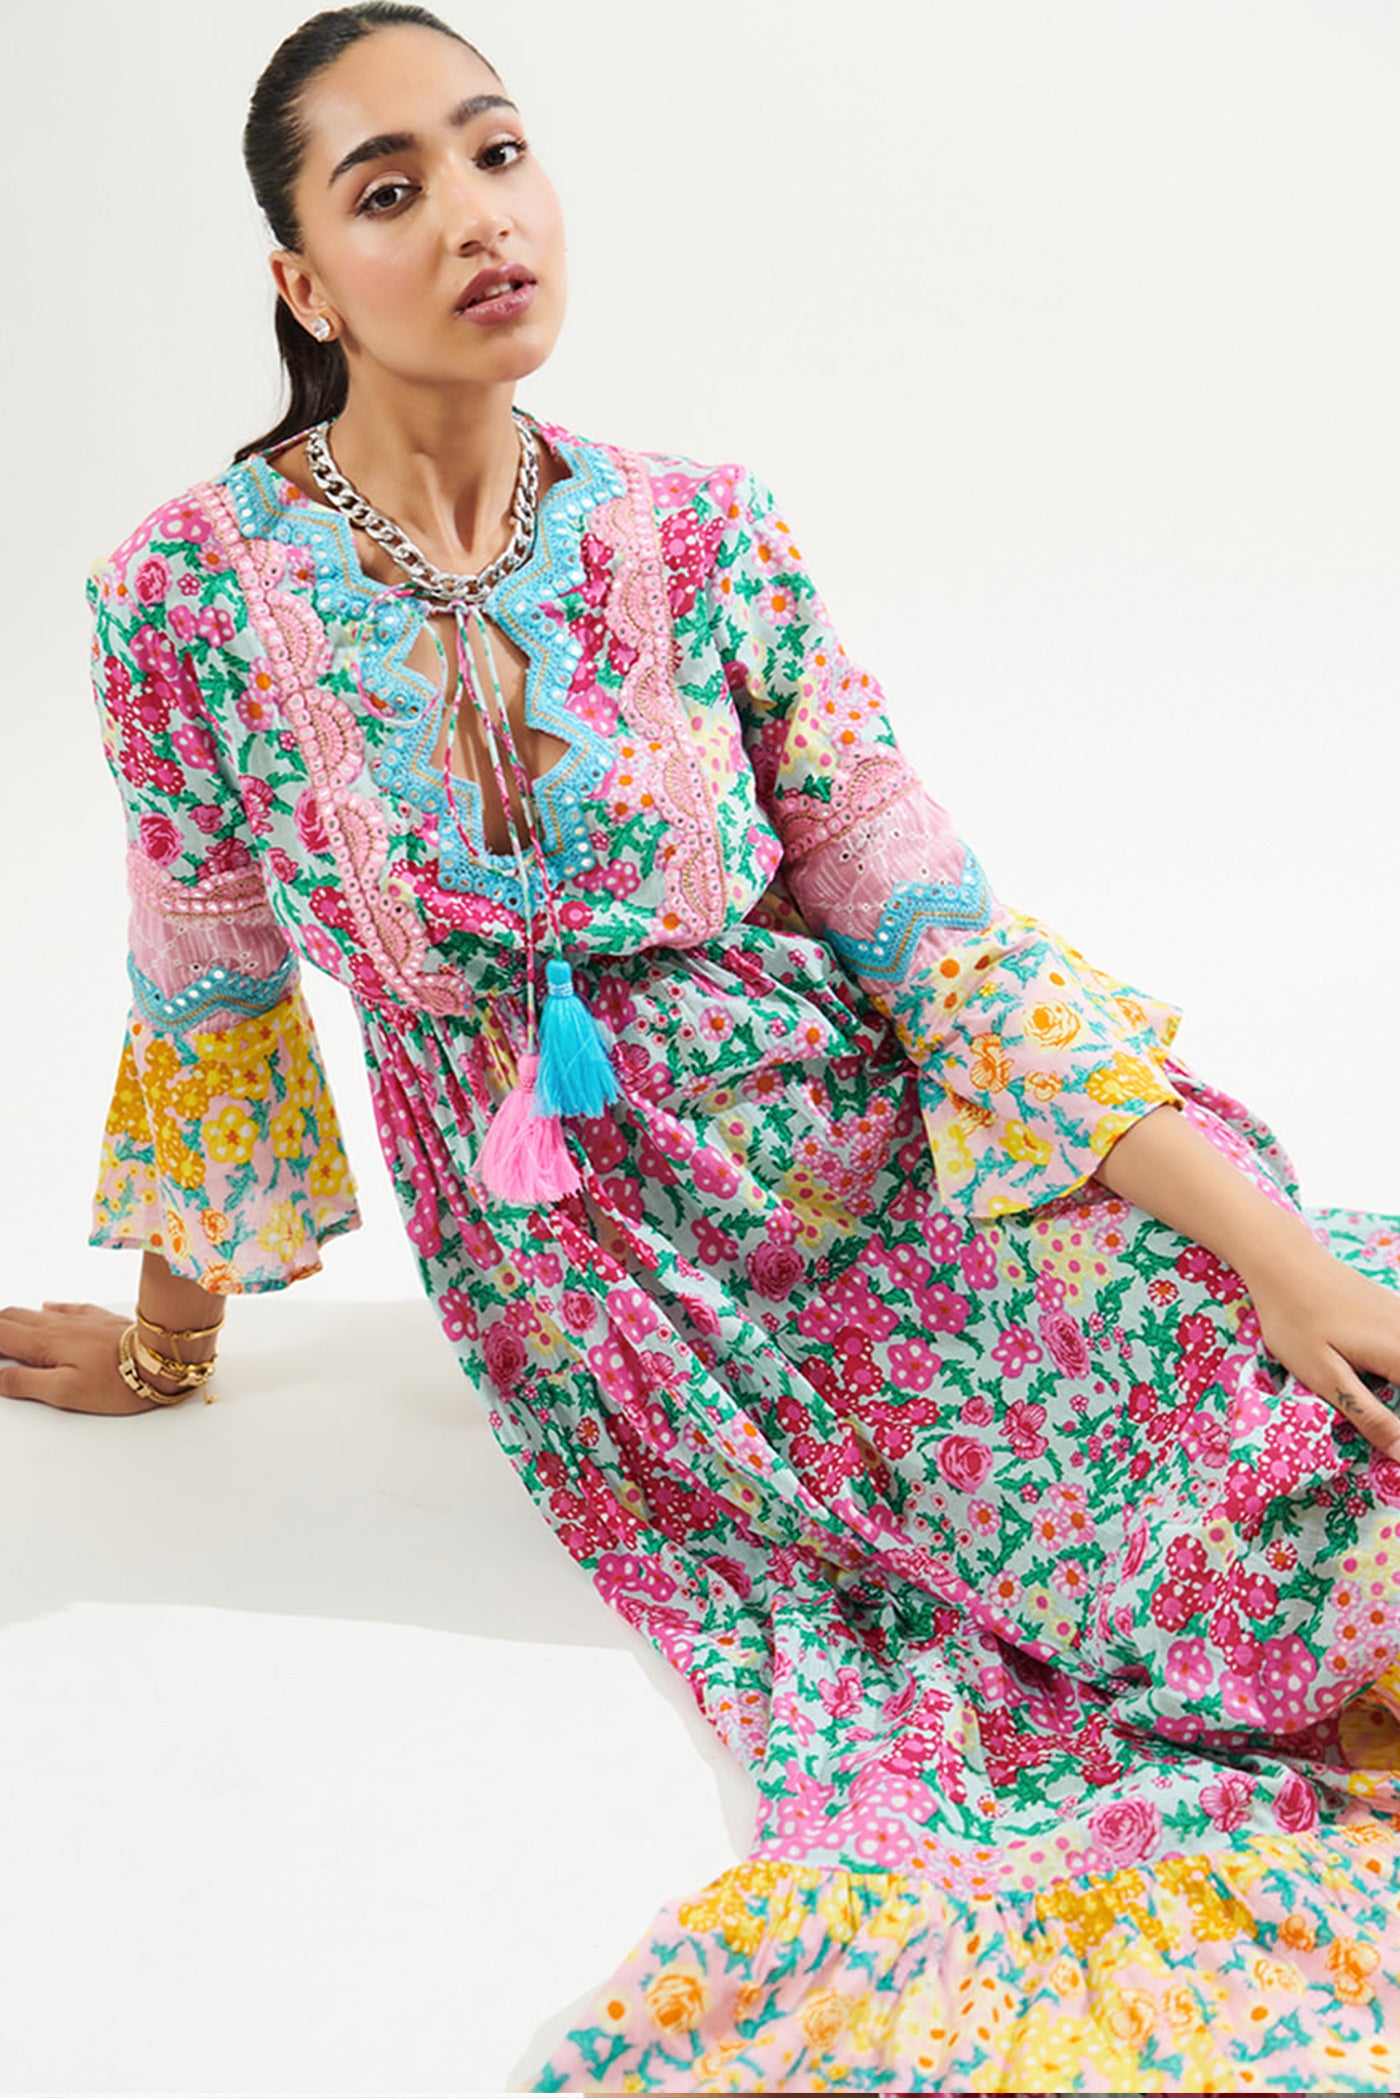 Floral Print Dresses and Other Spring Fashion Inspiration